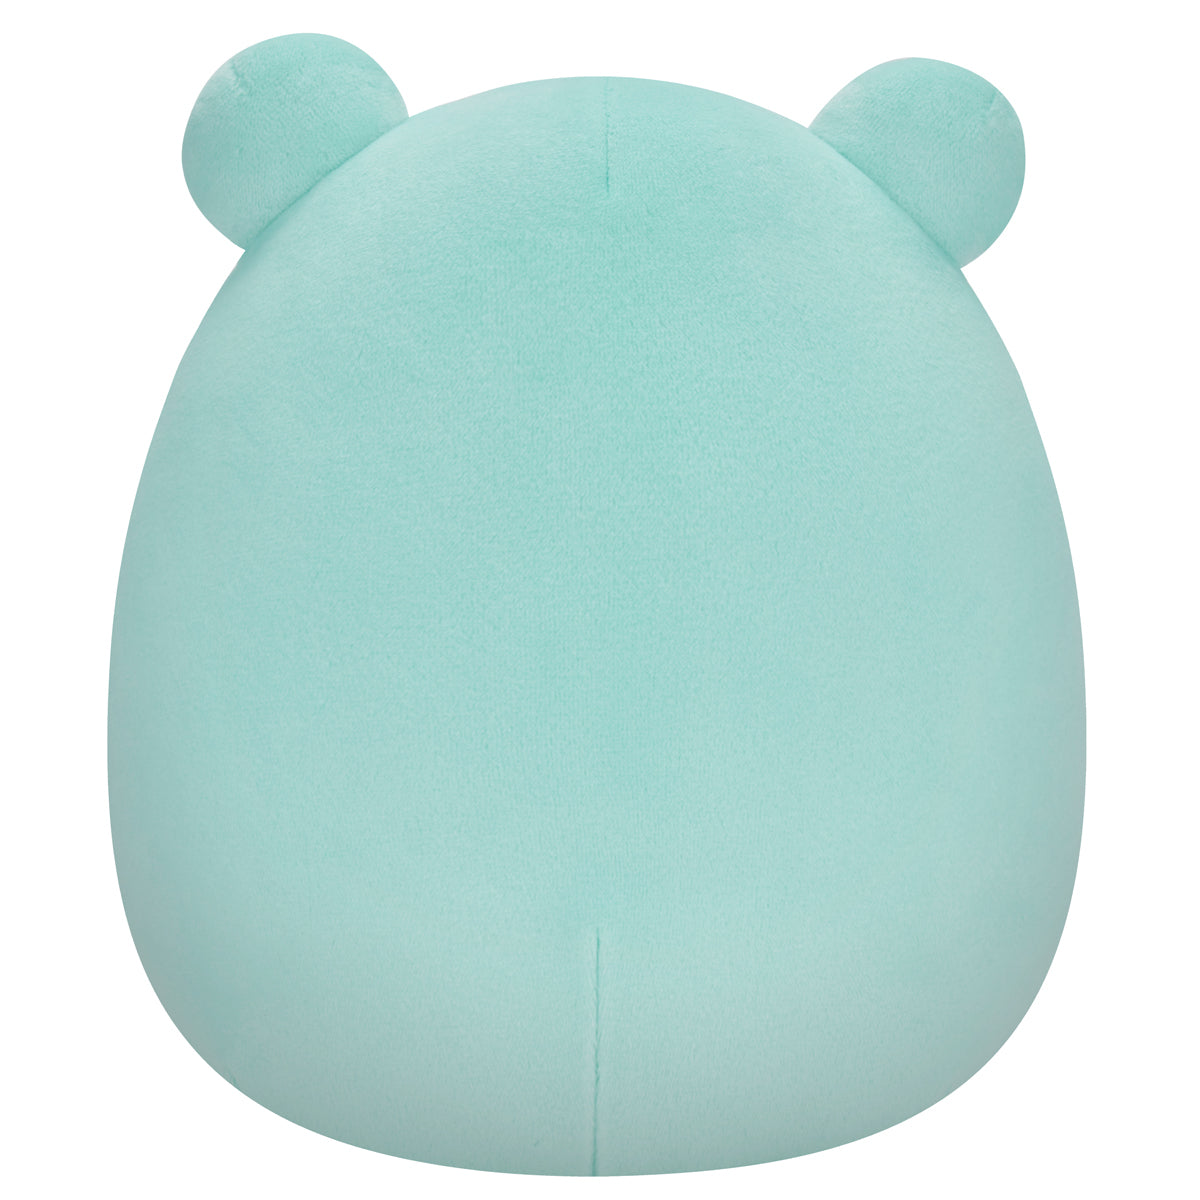 Squishmallows 7.5" Dear The Frog